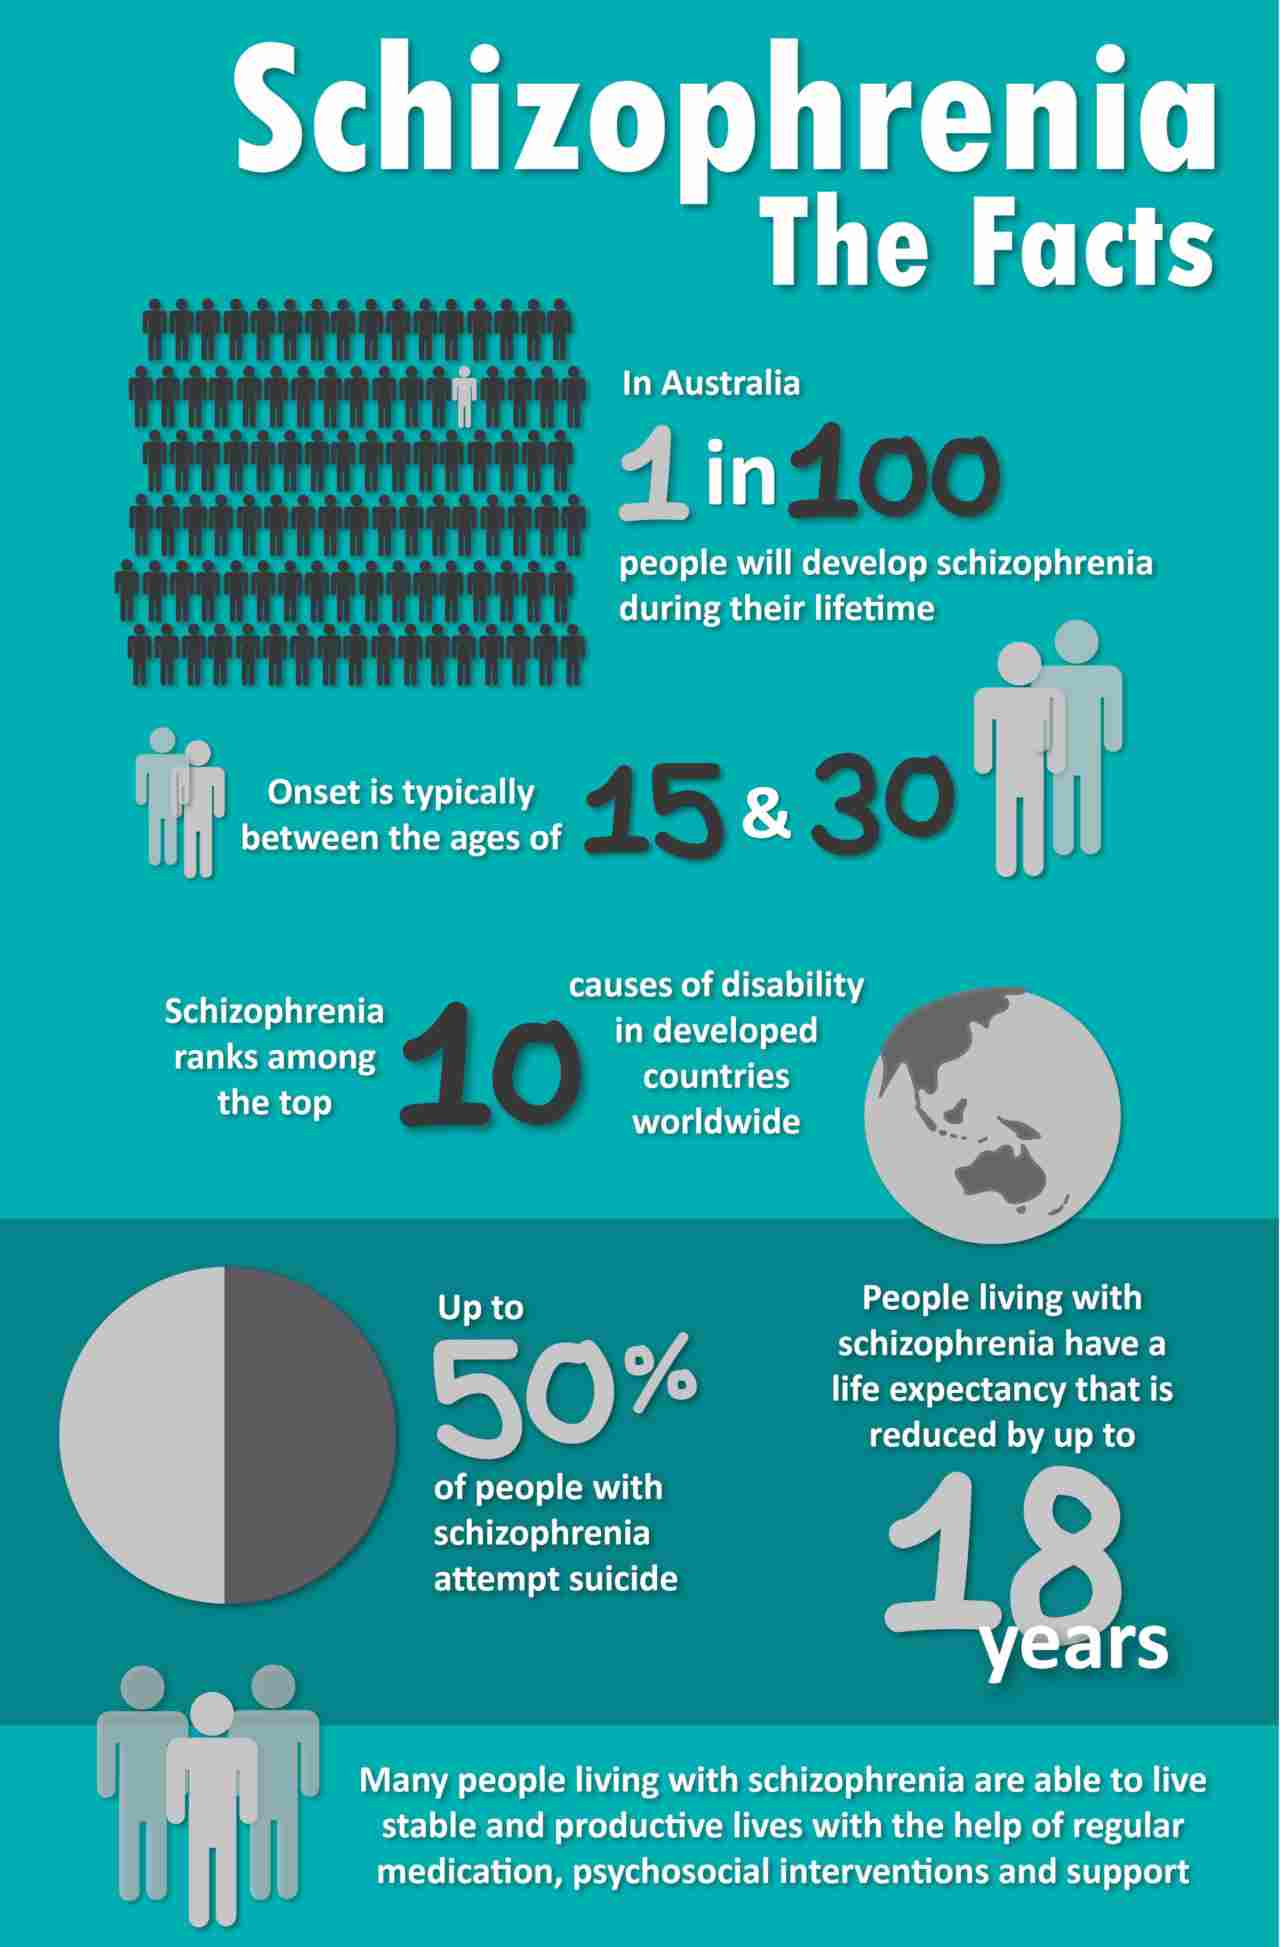 Facts about schizophrenia. Image credit: Mental Health Centre of South Australia